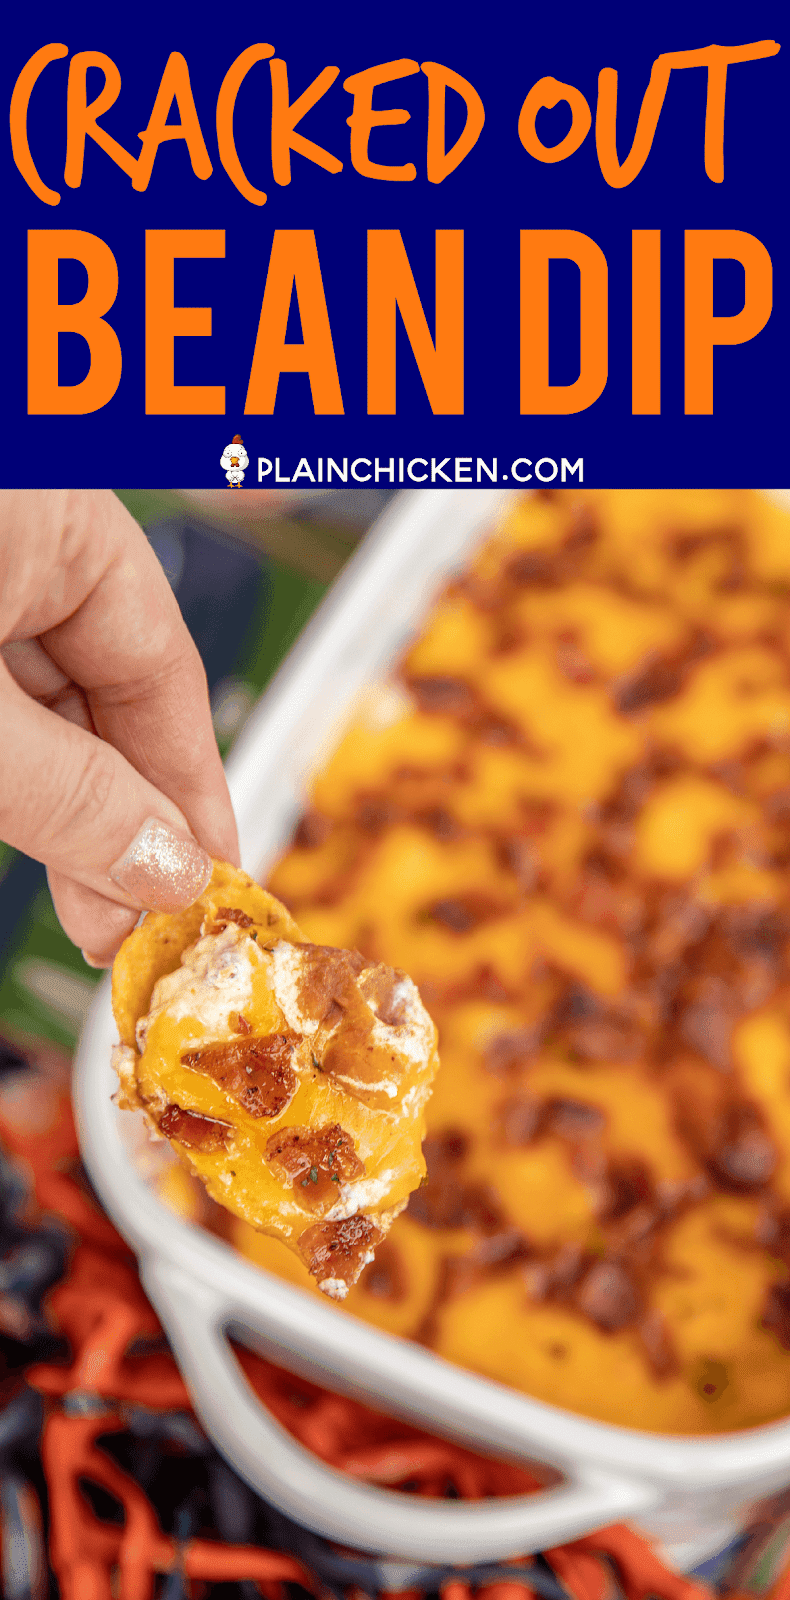 Cracked Out Bean Dip - SO addictive! Bean dip loaded with cheddar bacon and ranch. I could NOT stop eating this yummy dip. The flavors are amazing! Refried beans, taco seasoning, sour cream, ranch, bacon and cheddar cheese. Can make ahead of time and refrigerate until ready to bake. Serve with fritos and tortilla chips. This dip is always the first thing to go at our tailgates! I never have any leftovers! YUM! #dip #beandip #tailgating #appetizer #partyfood